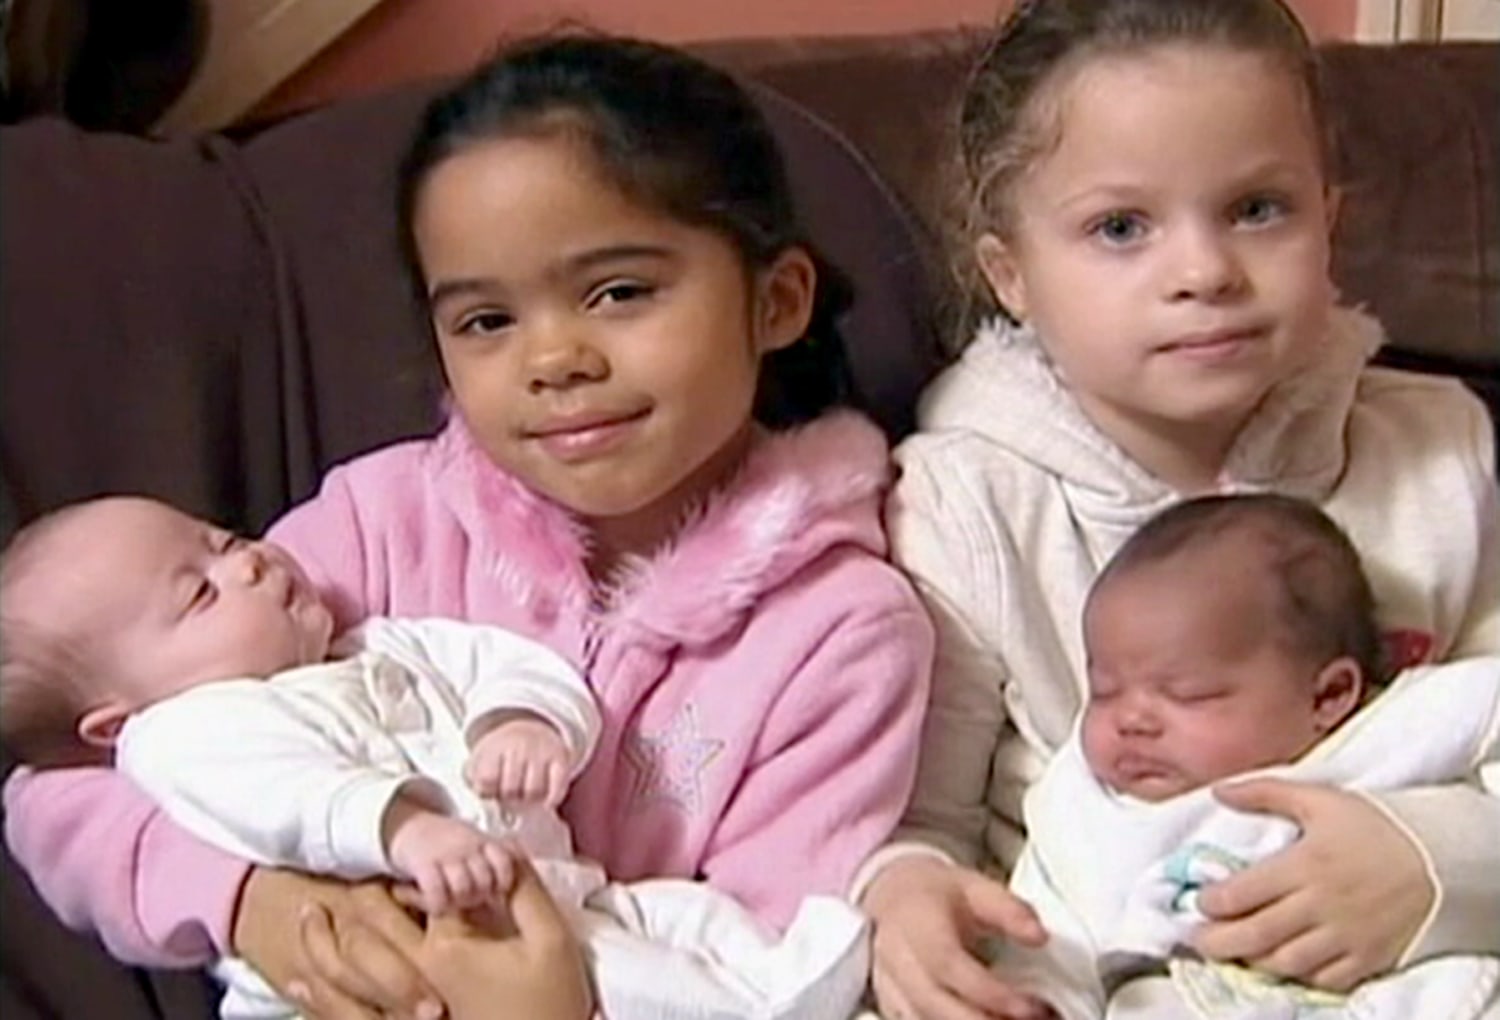 UK twins turn heads: One is white, the other black